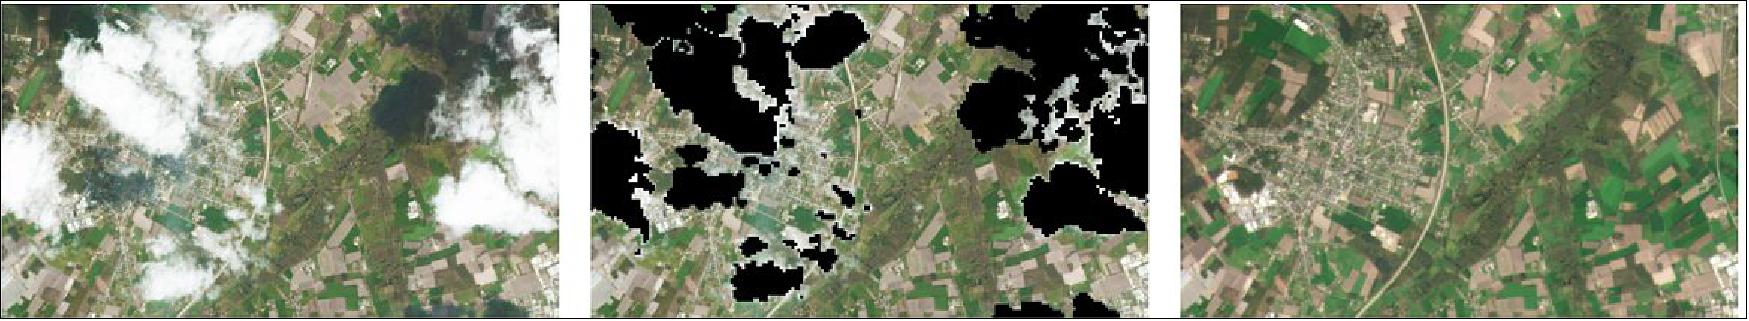 Figure 11: SAR enabling advanced imaging of areas previously obscured by cloud cover over Eksel, Belgium in 2021, image credit: Planet Labs Inc.)